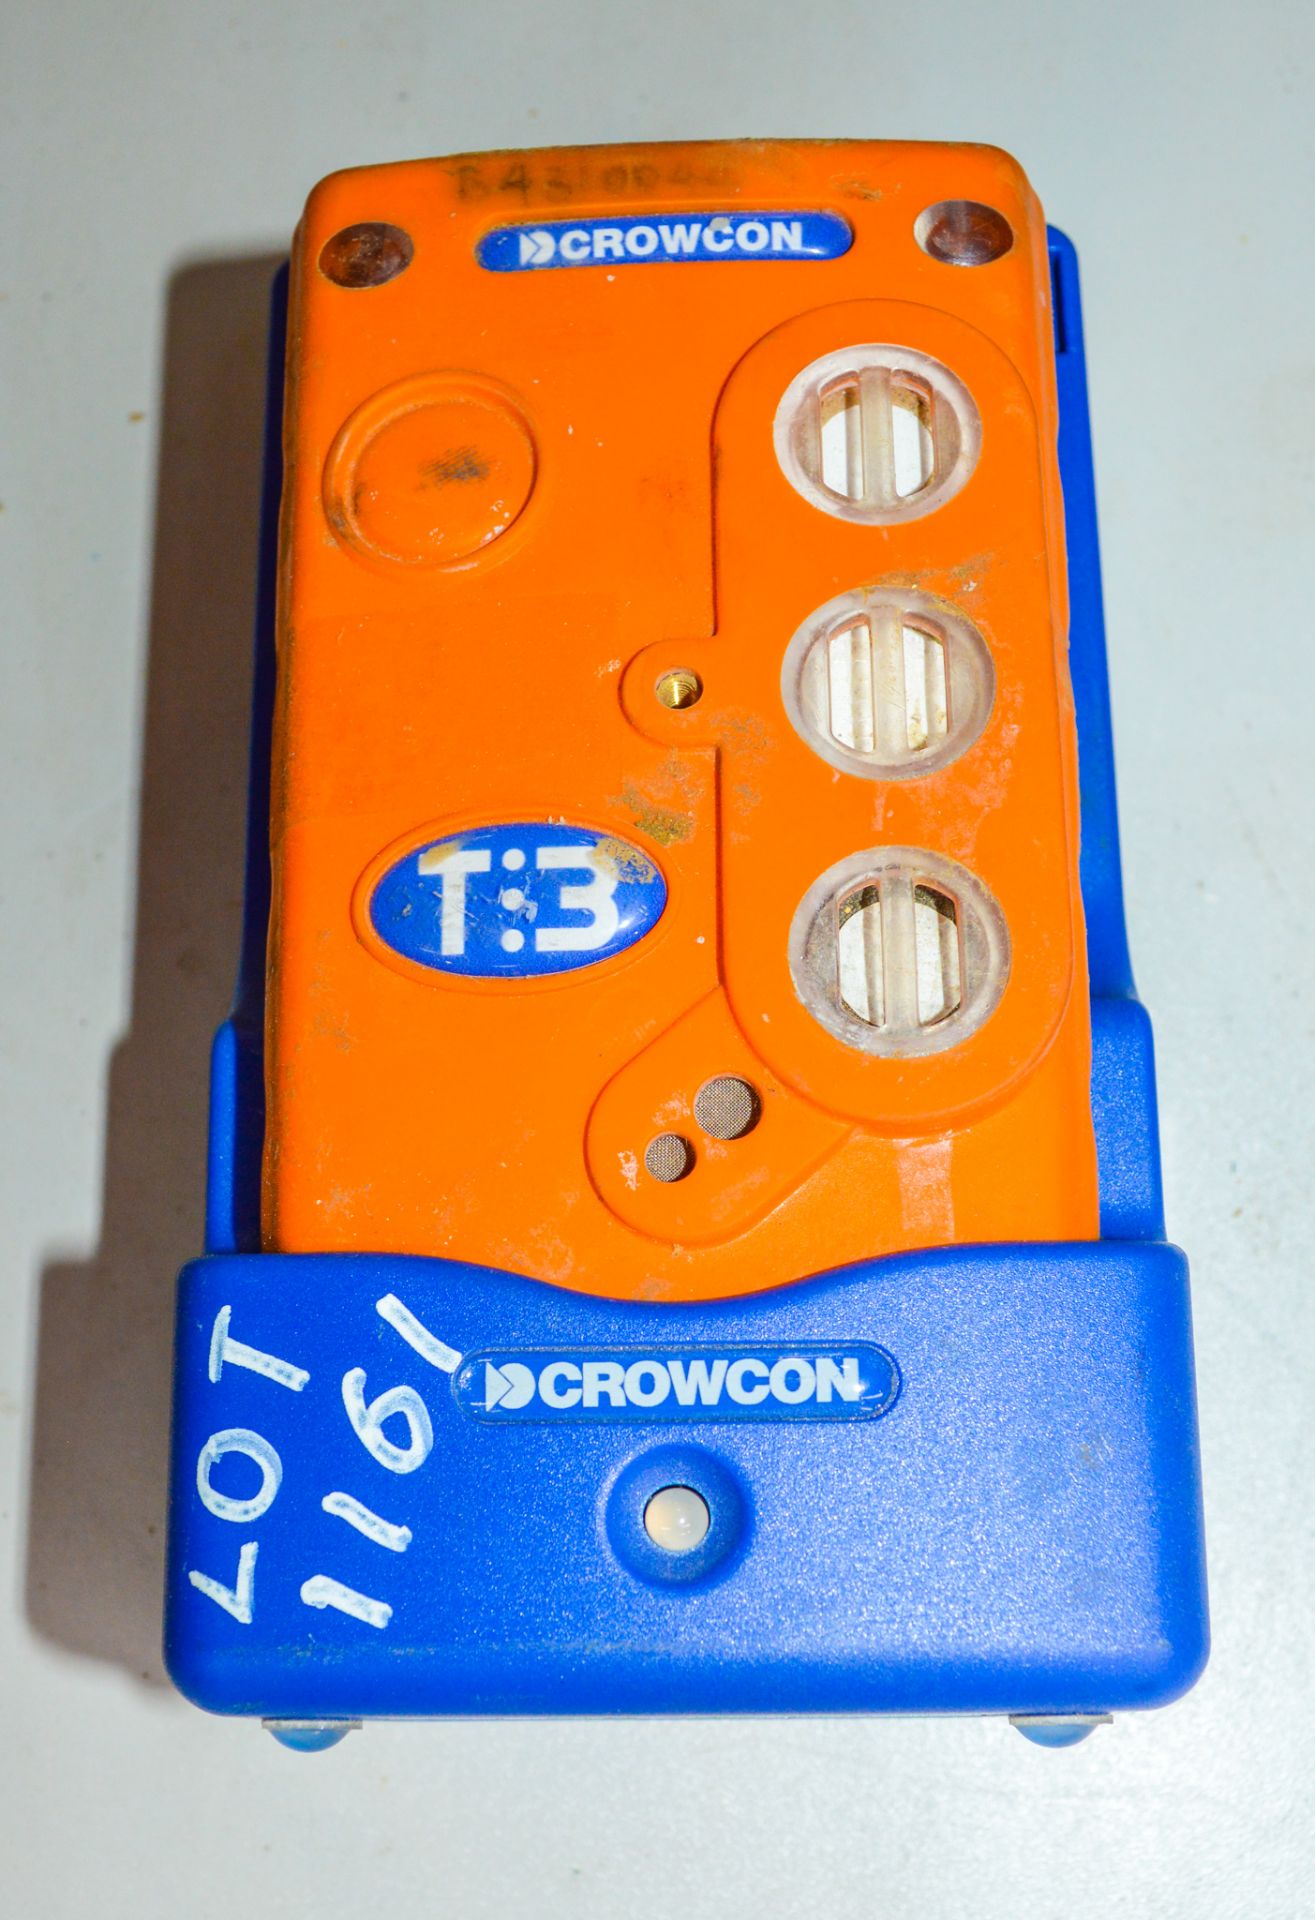 Crowcon gas detector B9310044 c/w charging dock but no lead **